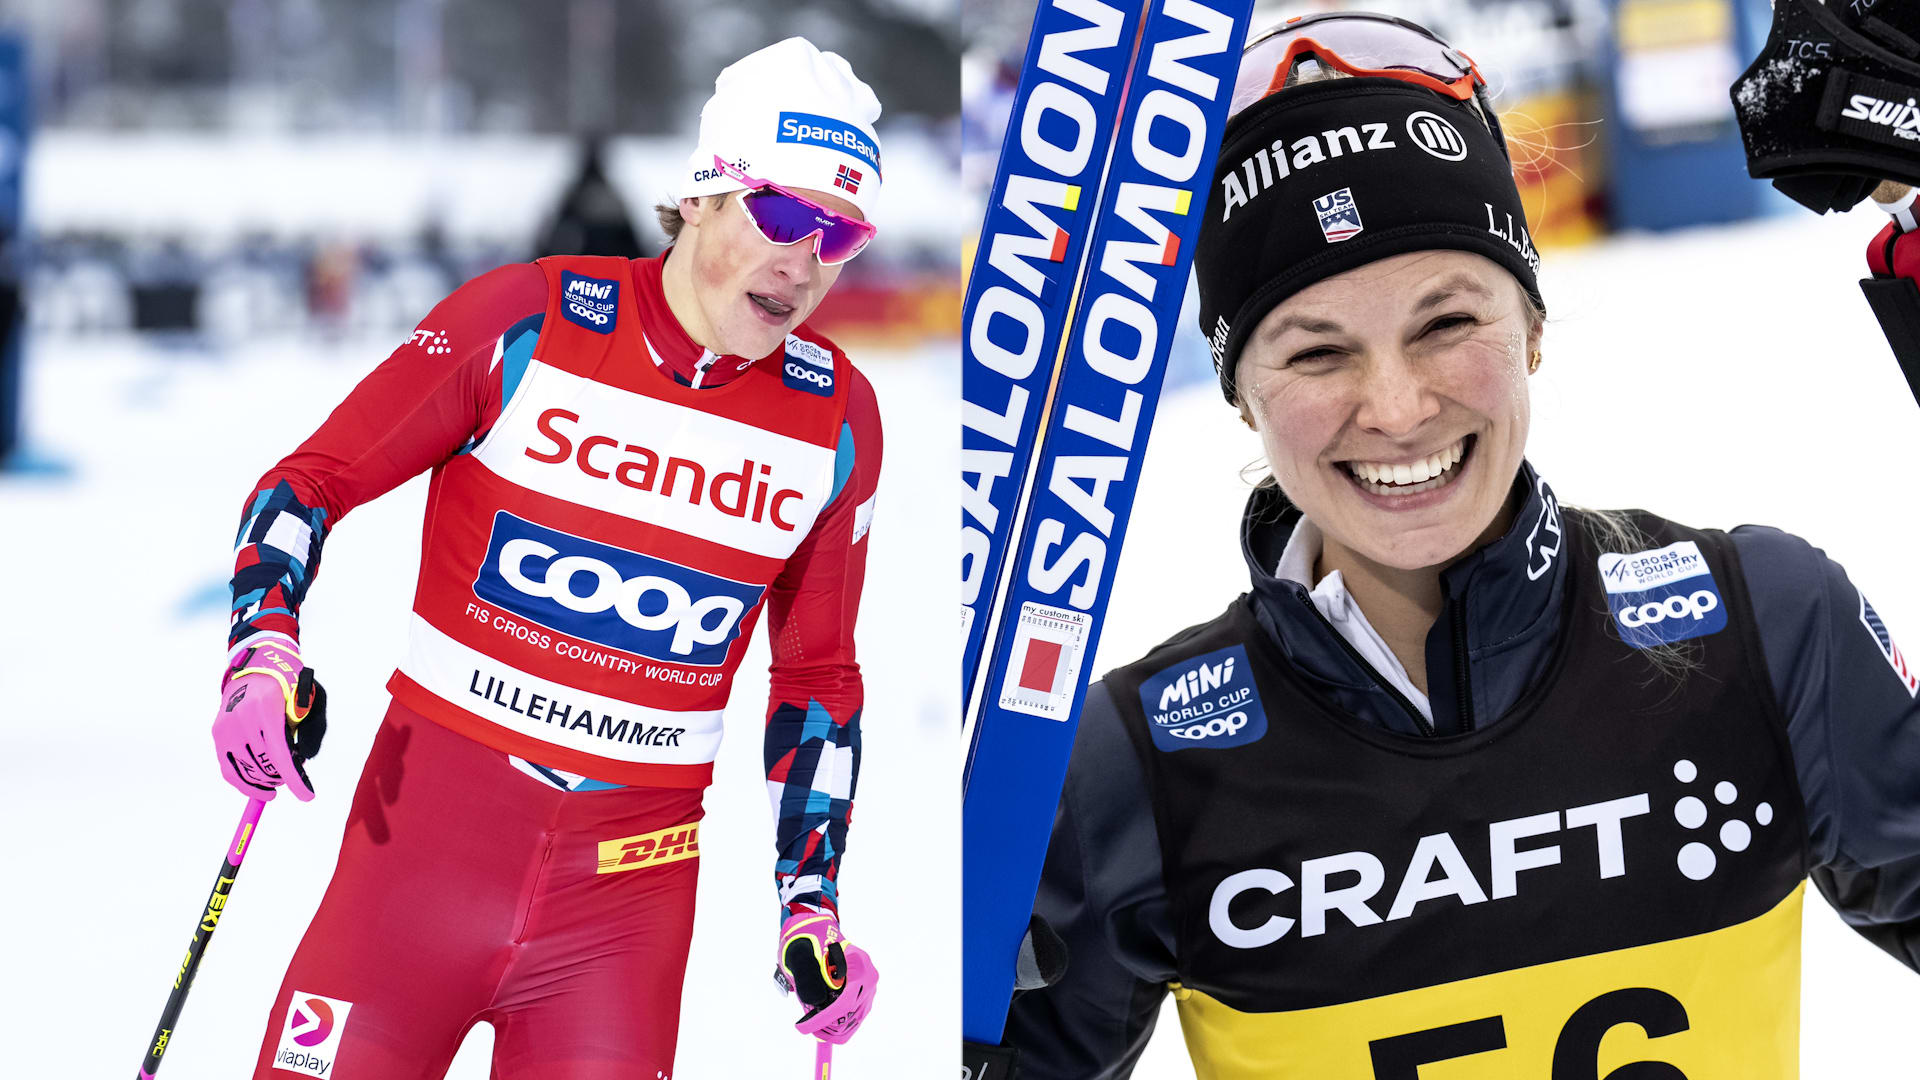 Tour de Ski 2022-23: Preview, schedule and stars to watch